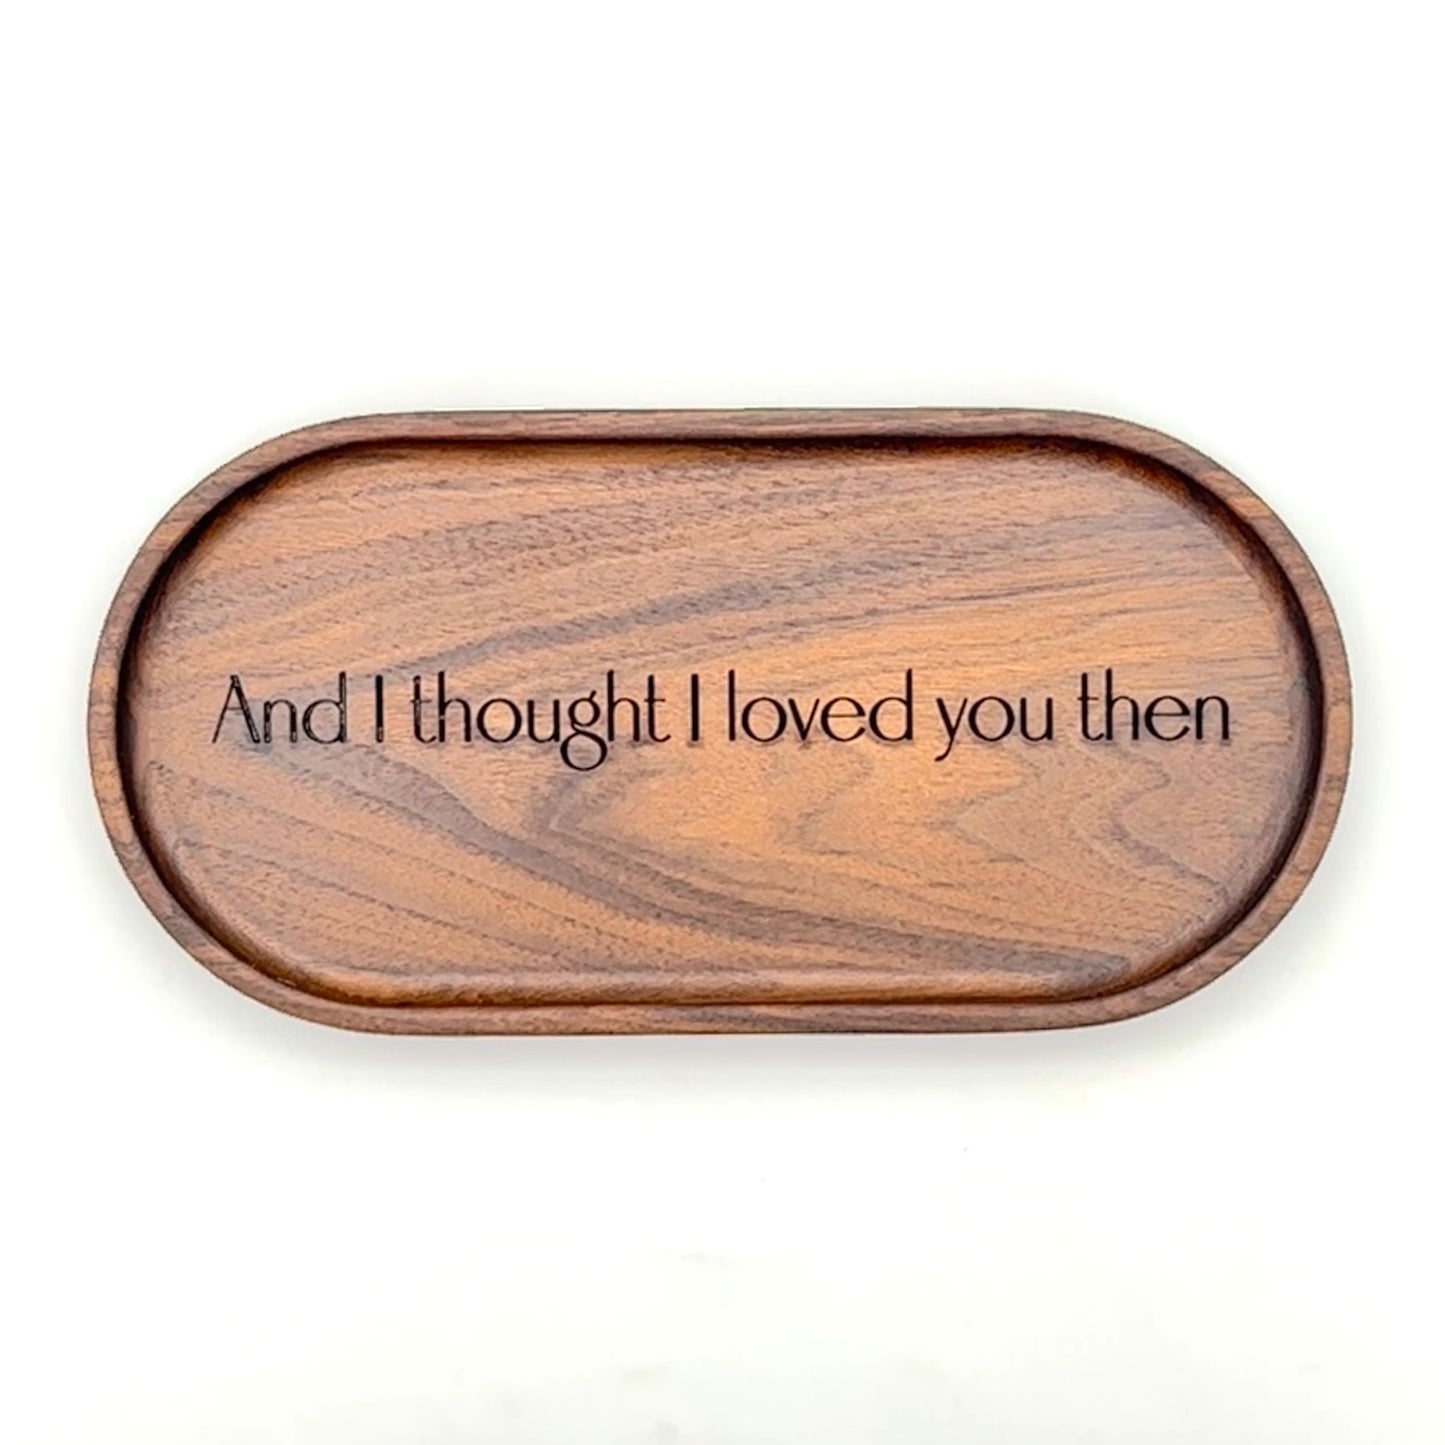 Catch-All Tray (Small) | Walnut/Cherry Wood | Handcrafted, Laser Etched Design | 4x8